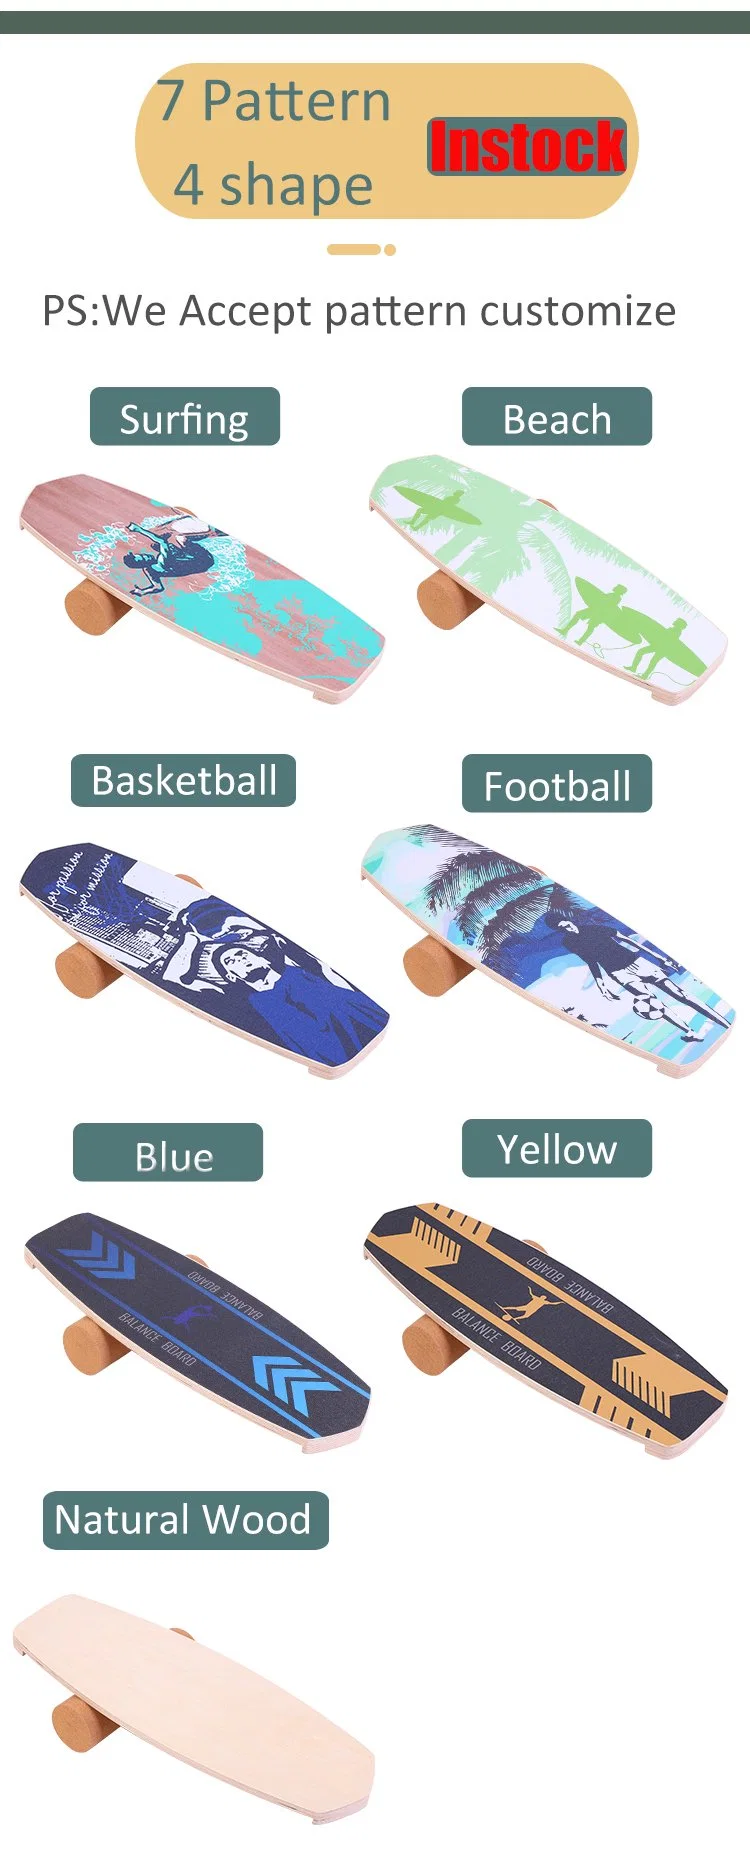 Birth Plywood Wooden Balance Board with Cork Roller for Yoga Juggle Soccer Hockey Skateboarding Leg Exercises Surfing